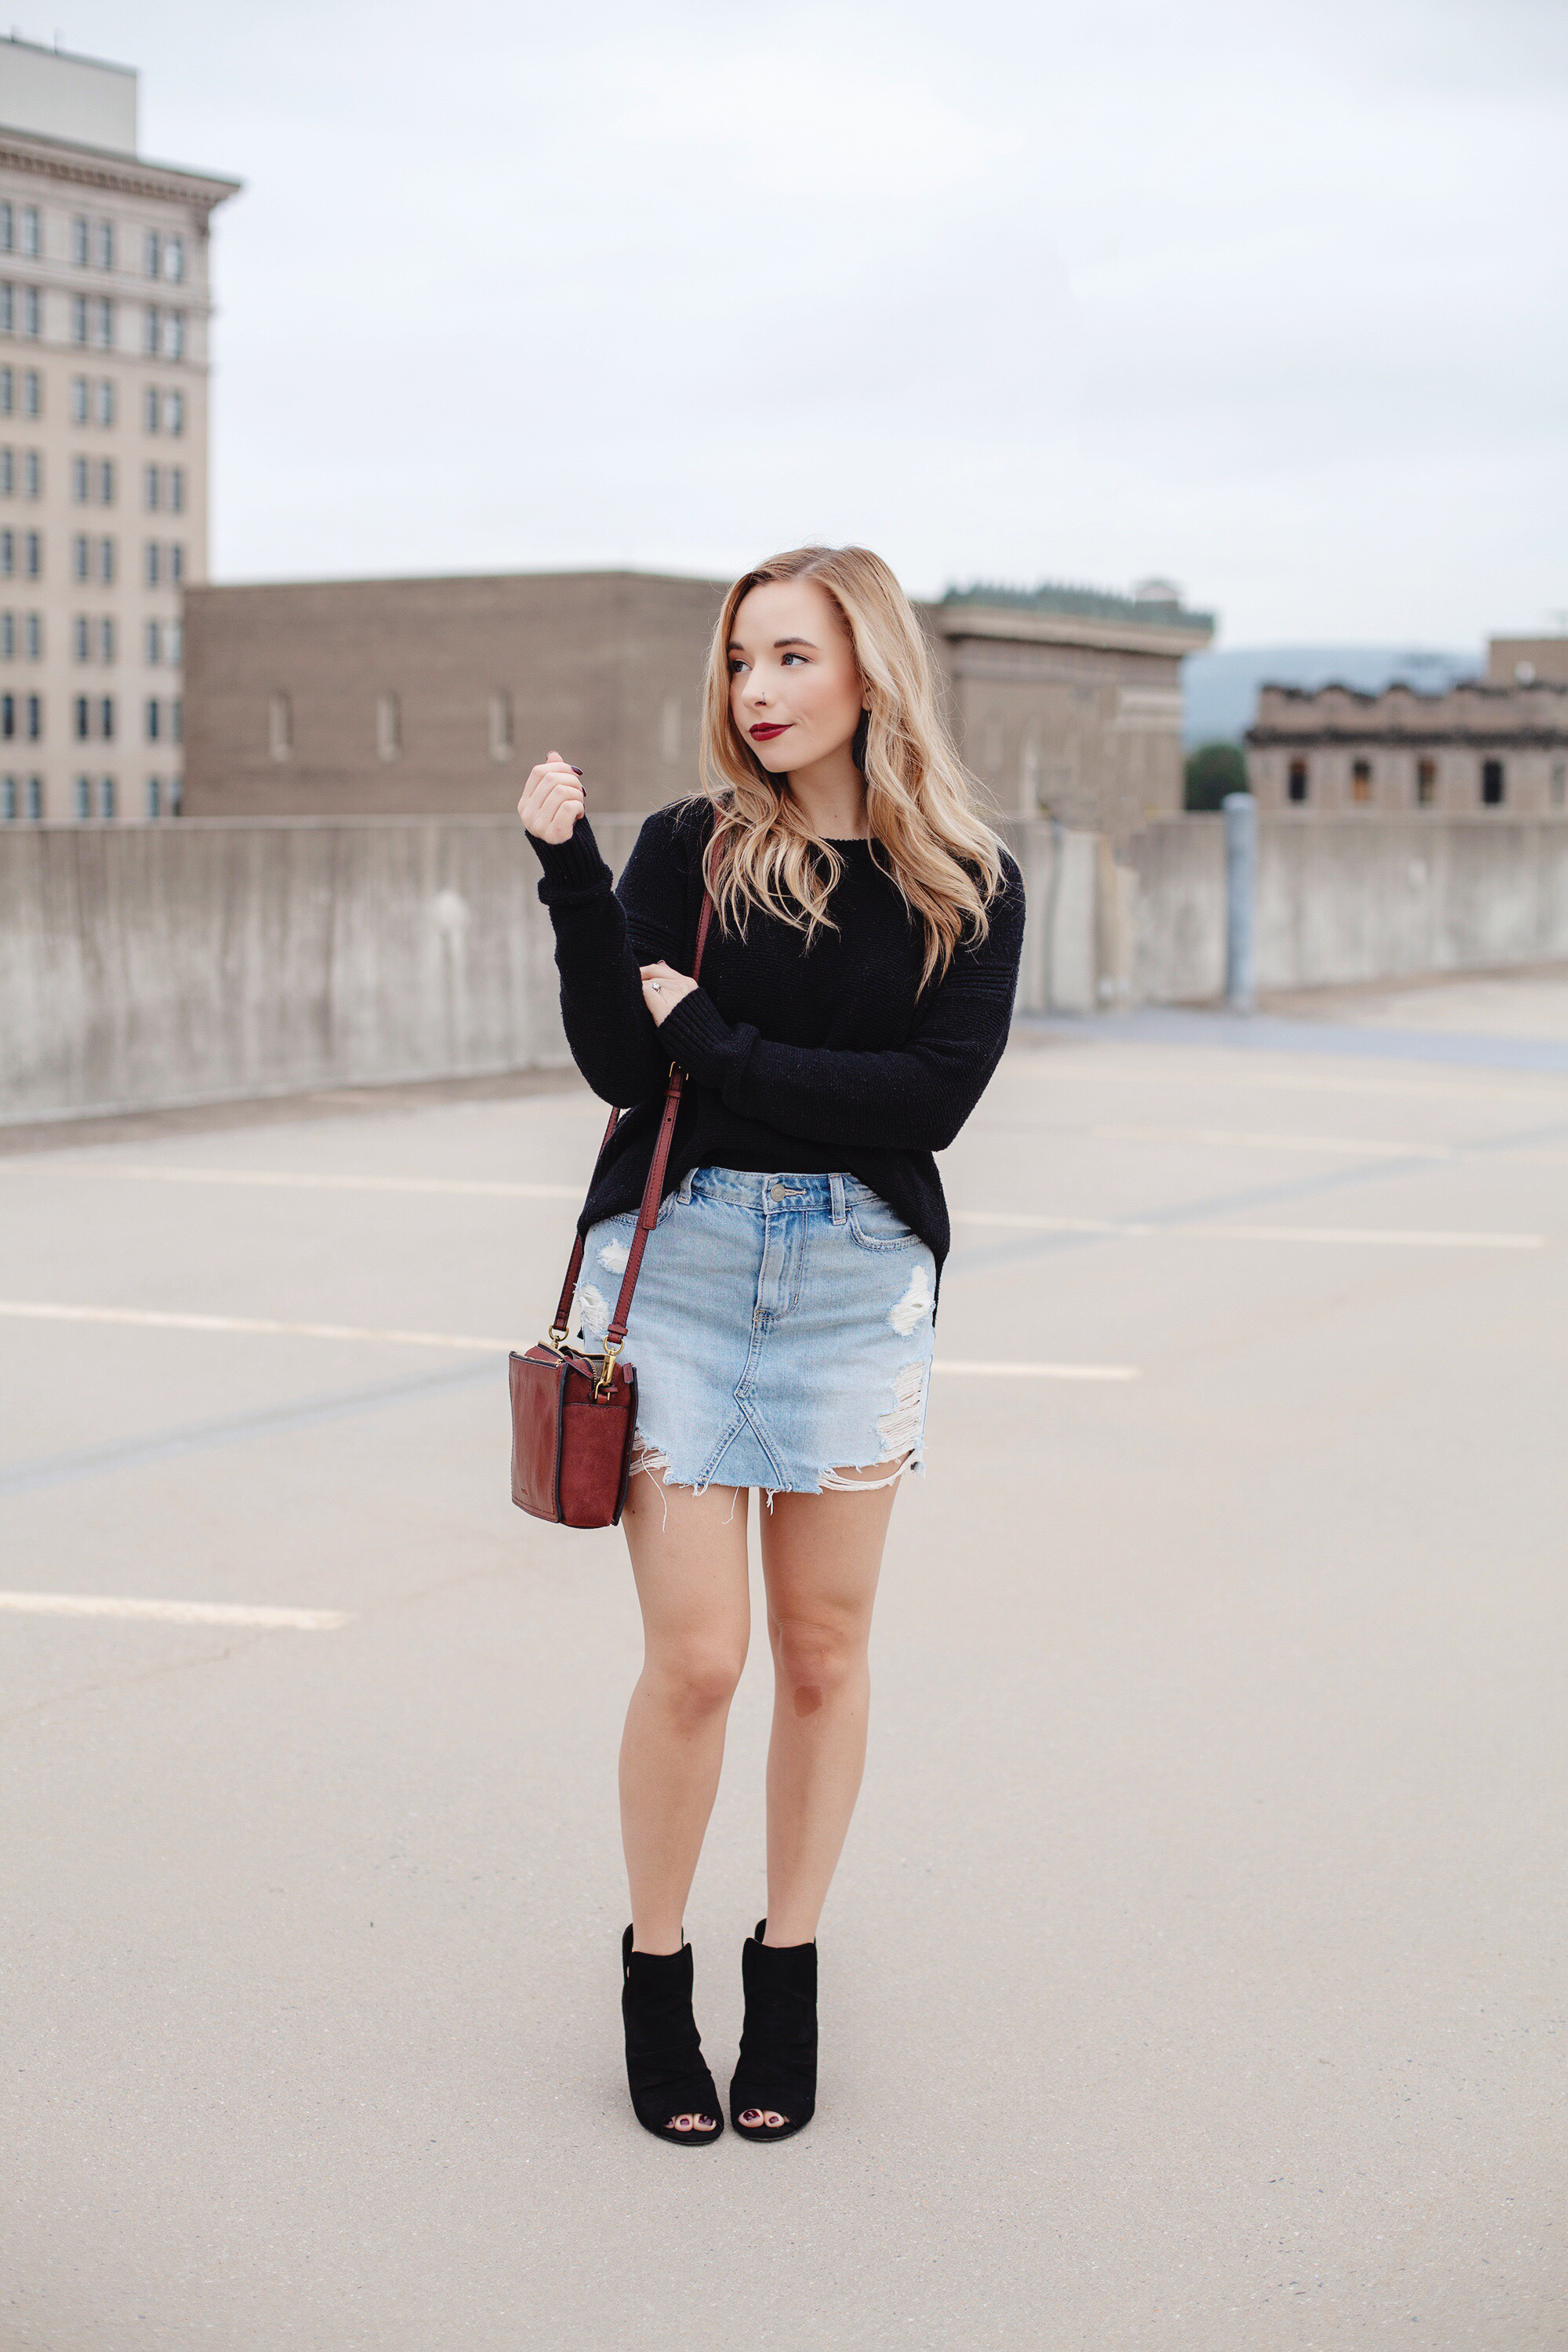 11 Cute Jean Skirt Outfits - Denim Skirt Outfit Ideas for Teens